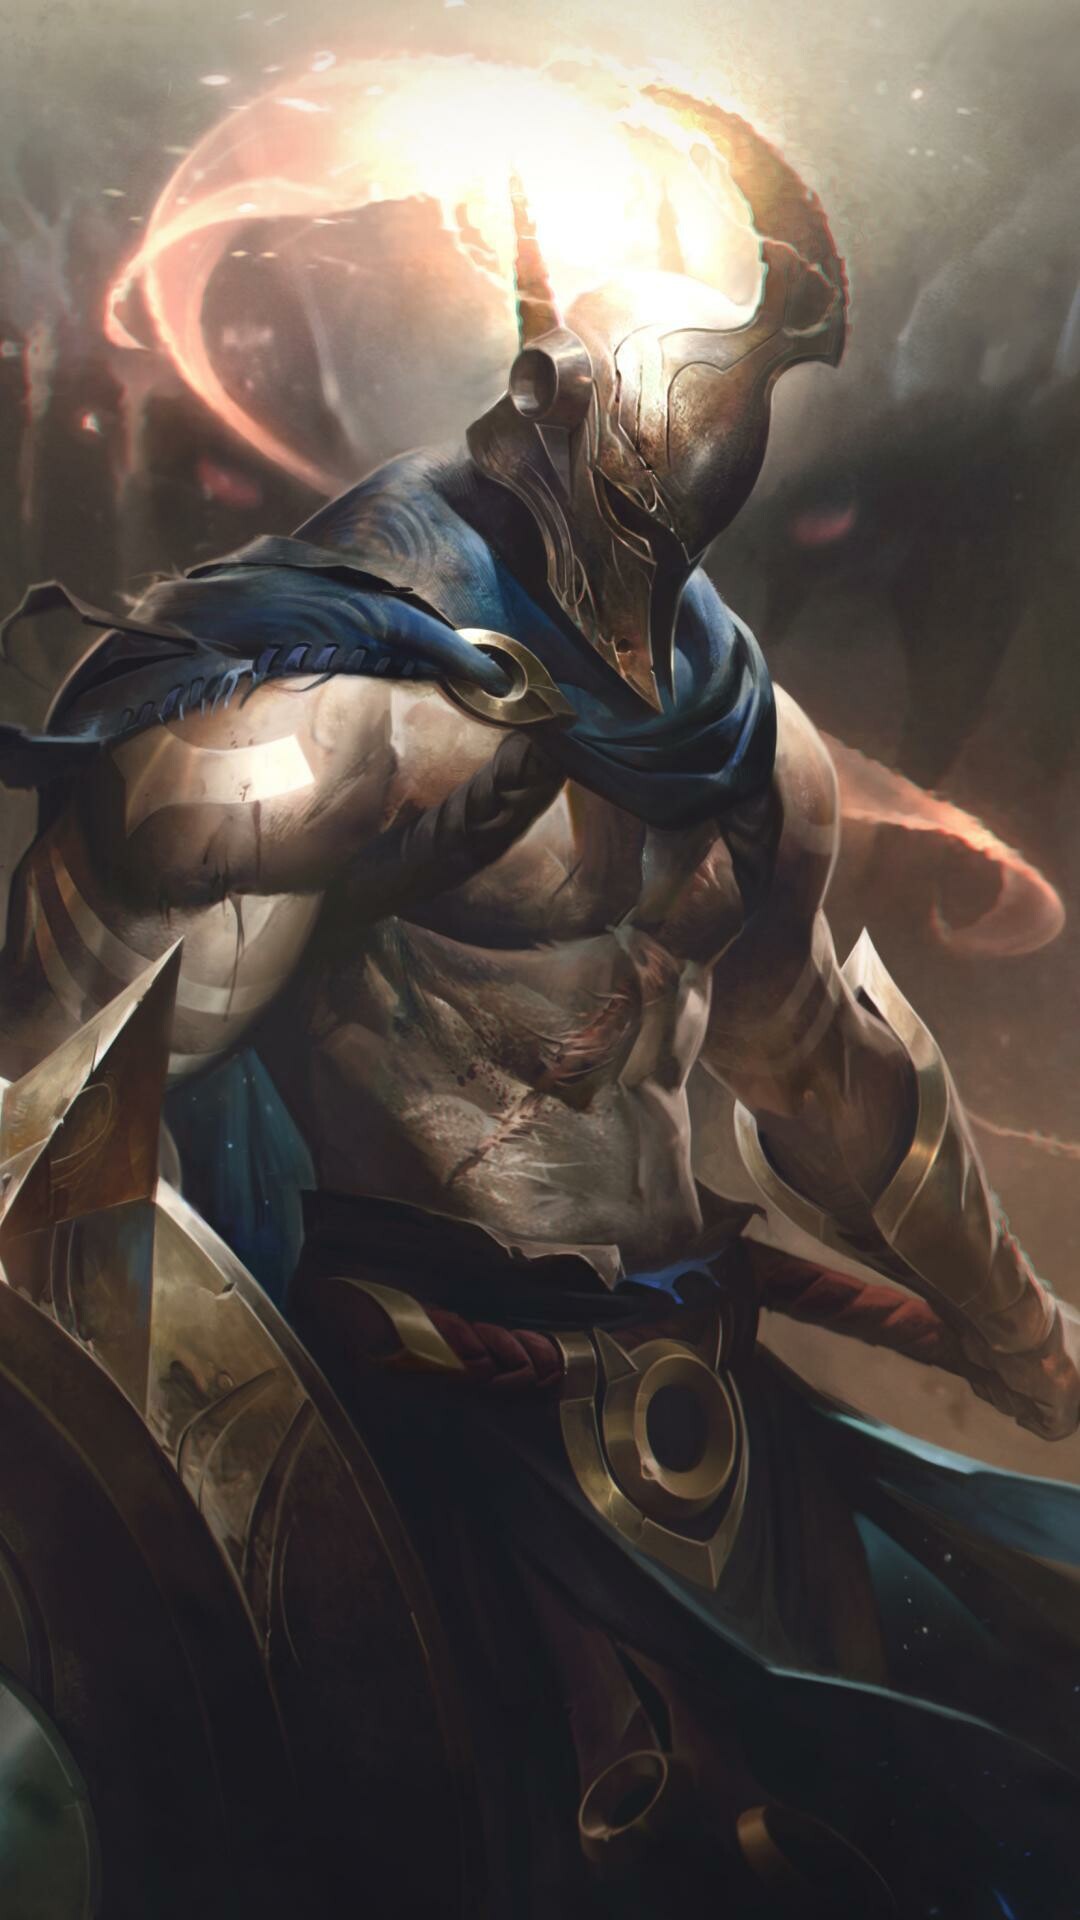 League of Legends: Pantheon, the Unbreakable Spear, Fighter, Diver. 1080x1920 Full HD Background.